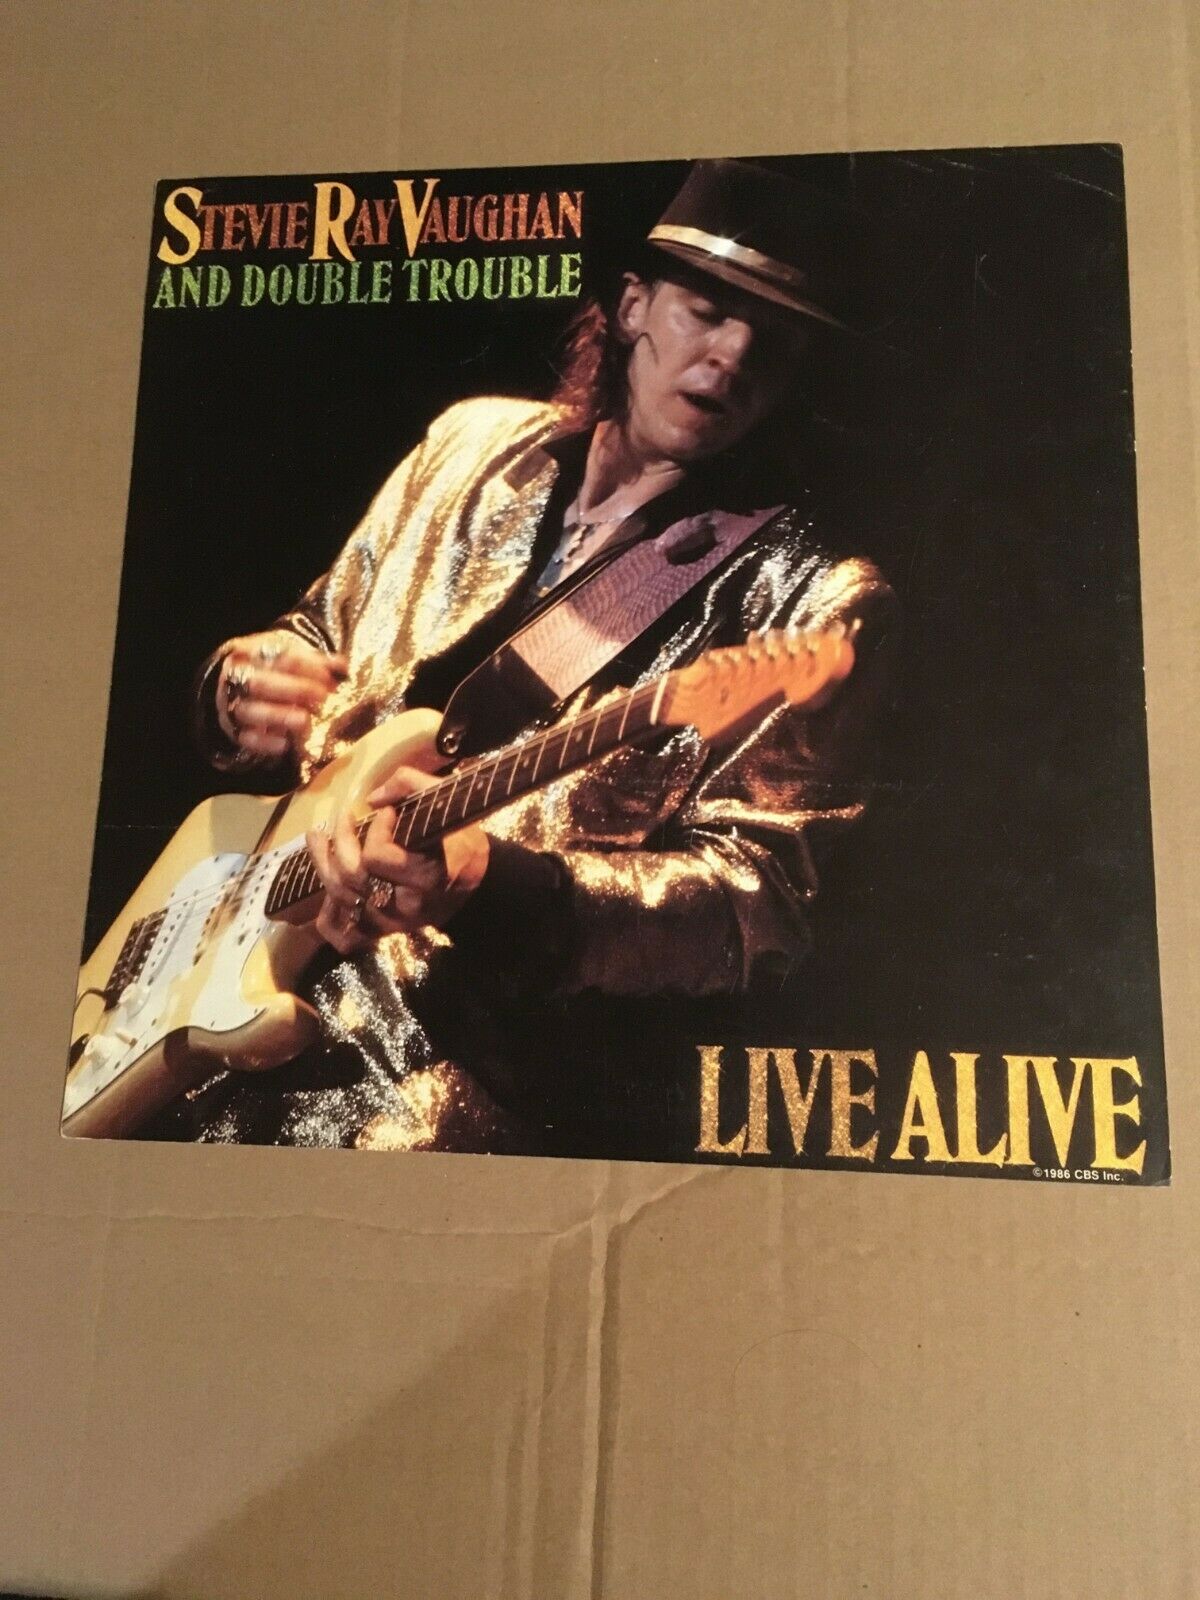 Stevie Ray Vaughn & Double Trouble Live Alive Us Promo Only Album Flat (poster)